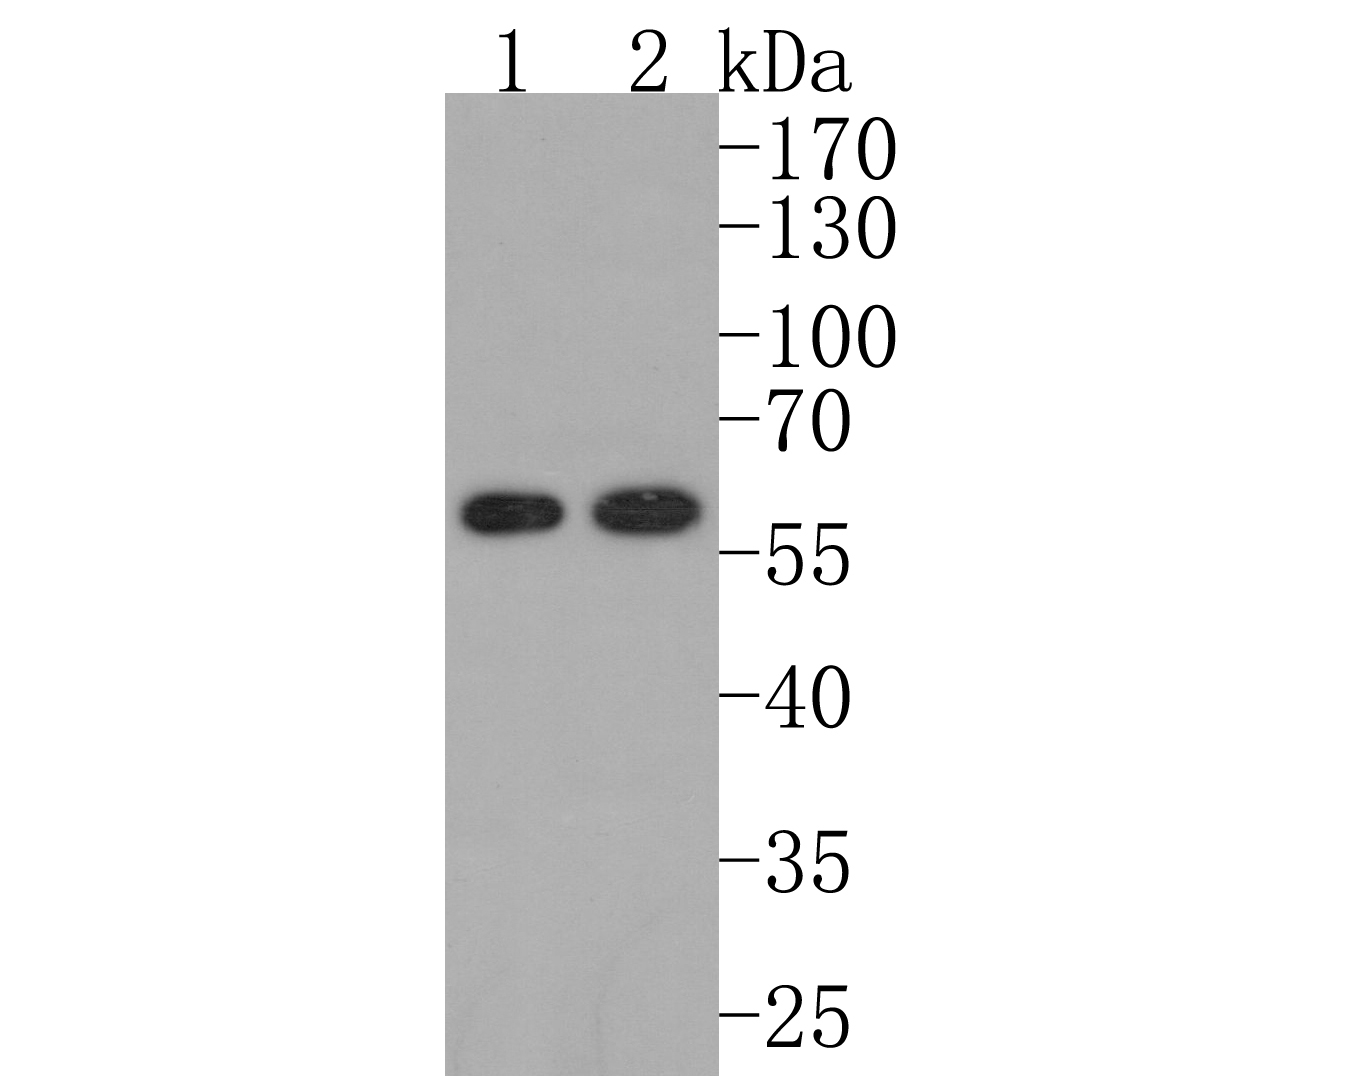 Western blot analysis of Retinoic Acid Receptor alpha on different lysates. Proteins were transferred to a PVDF membrane and blocked with 5% BSA in PBS for 1 hour at room temperature. The primary antibody (ET1611-77, 1/500) was used in 5% BSA at room temperature for 2 hours. Goat Anti-Rabbit IgG - HRP Secondary Antibody (HA1001) at 1:200,000 dilution was used for 1 hour at room temperature.<br />
Positive control: <br />
Lane 1: SK-Br-3 cell lysate<br />
Lane 2: MCF-7 cell lysate